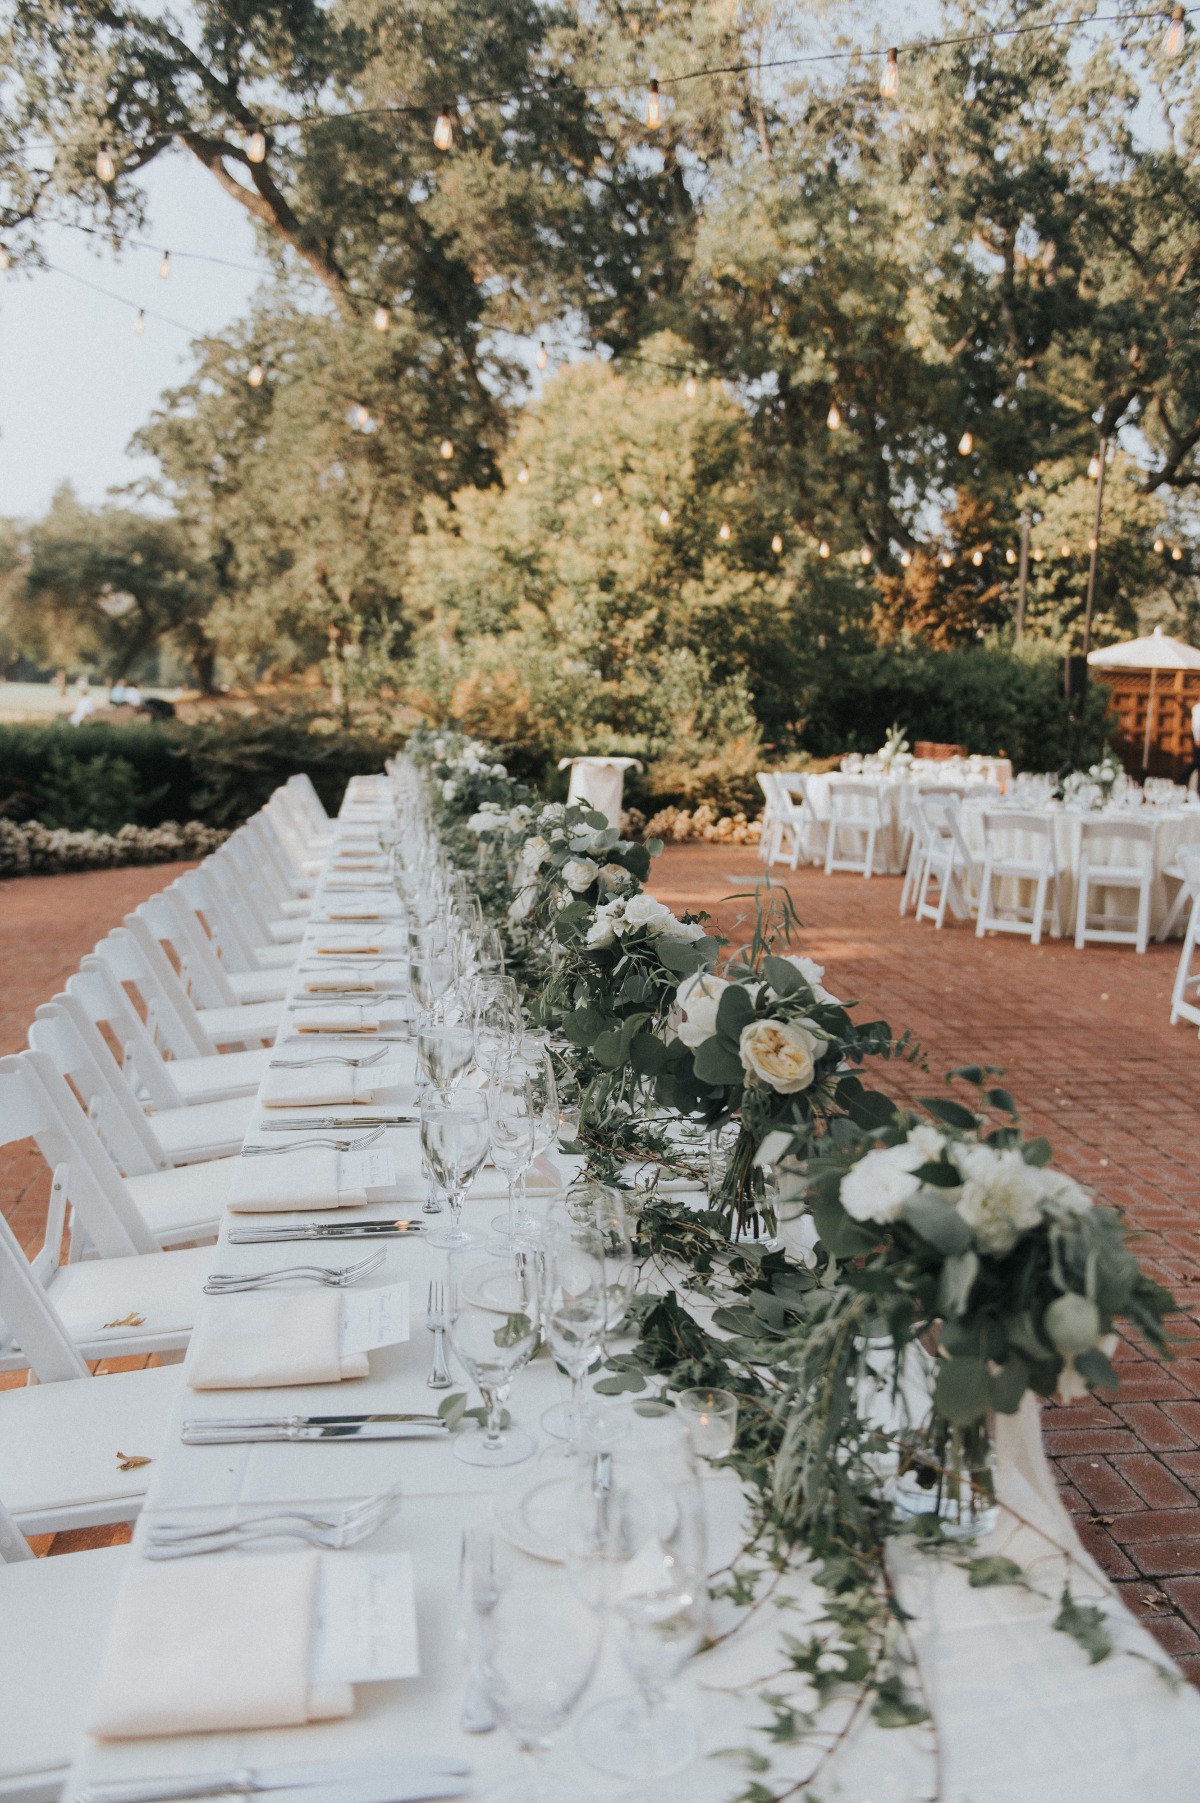 wedding party family style seating with white and greenery floral decor